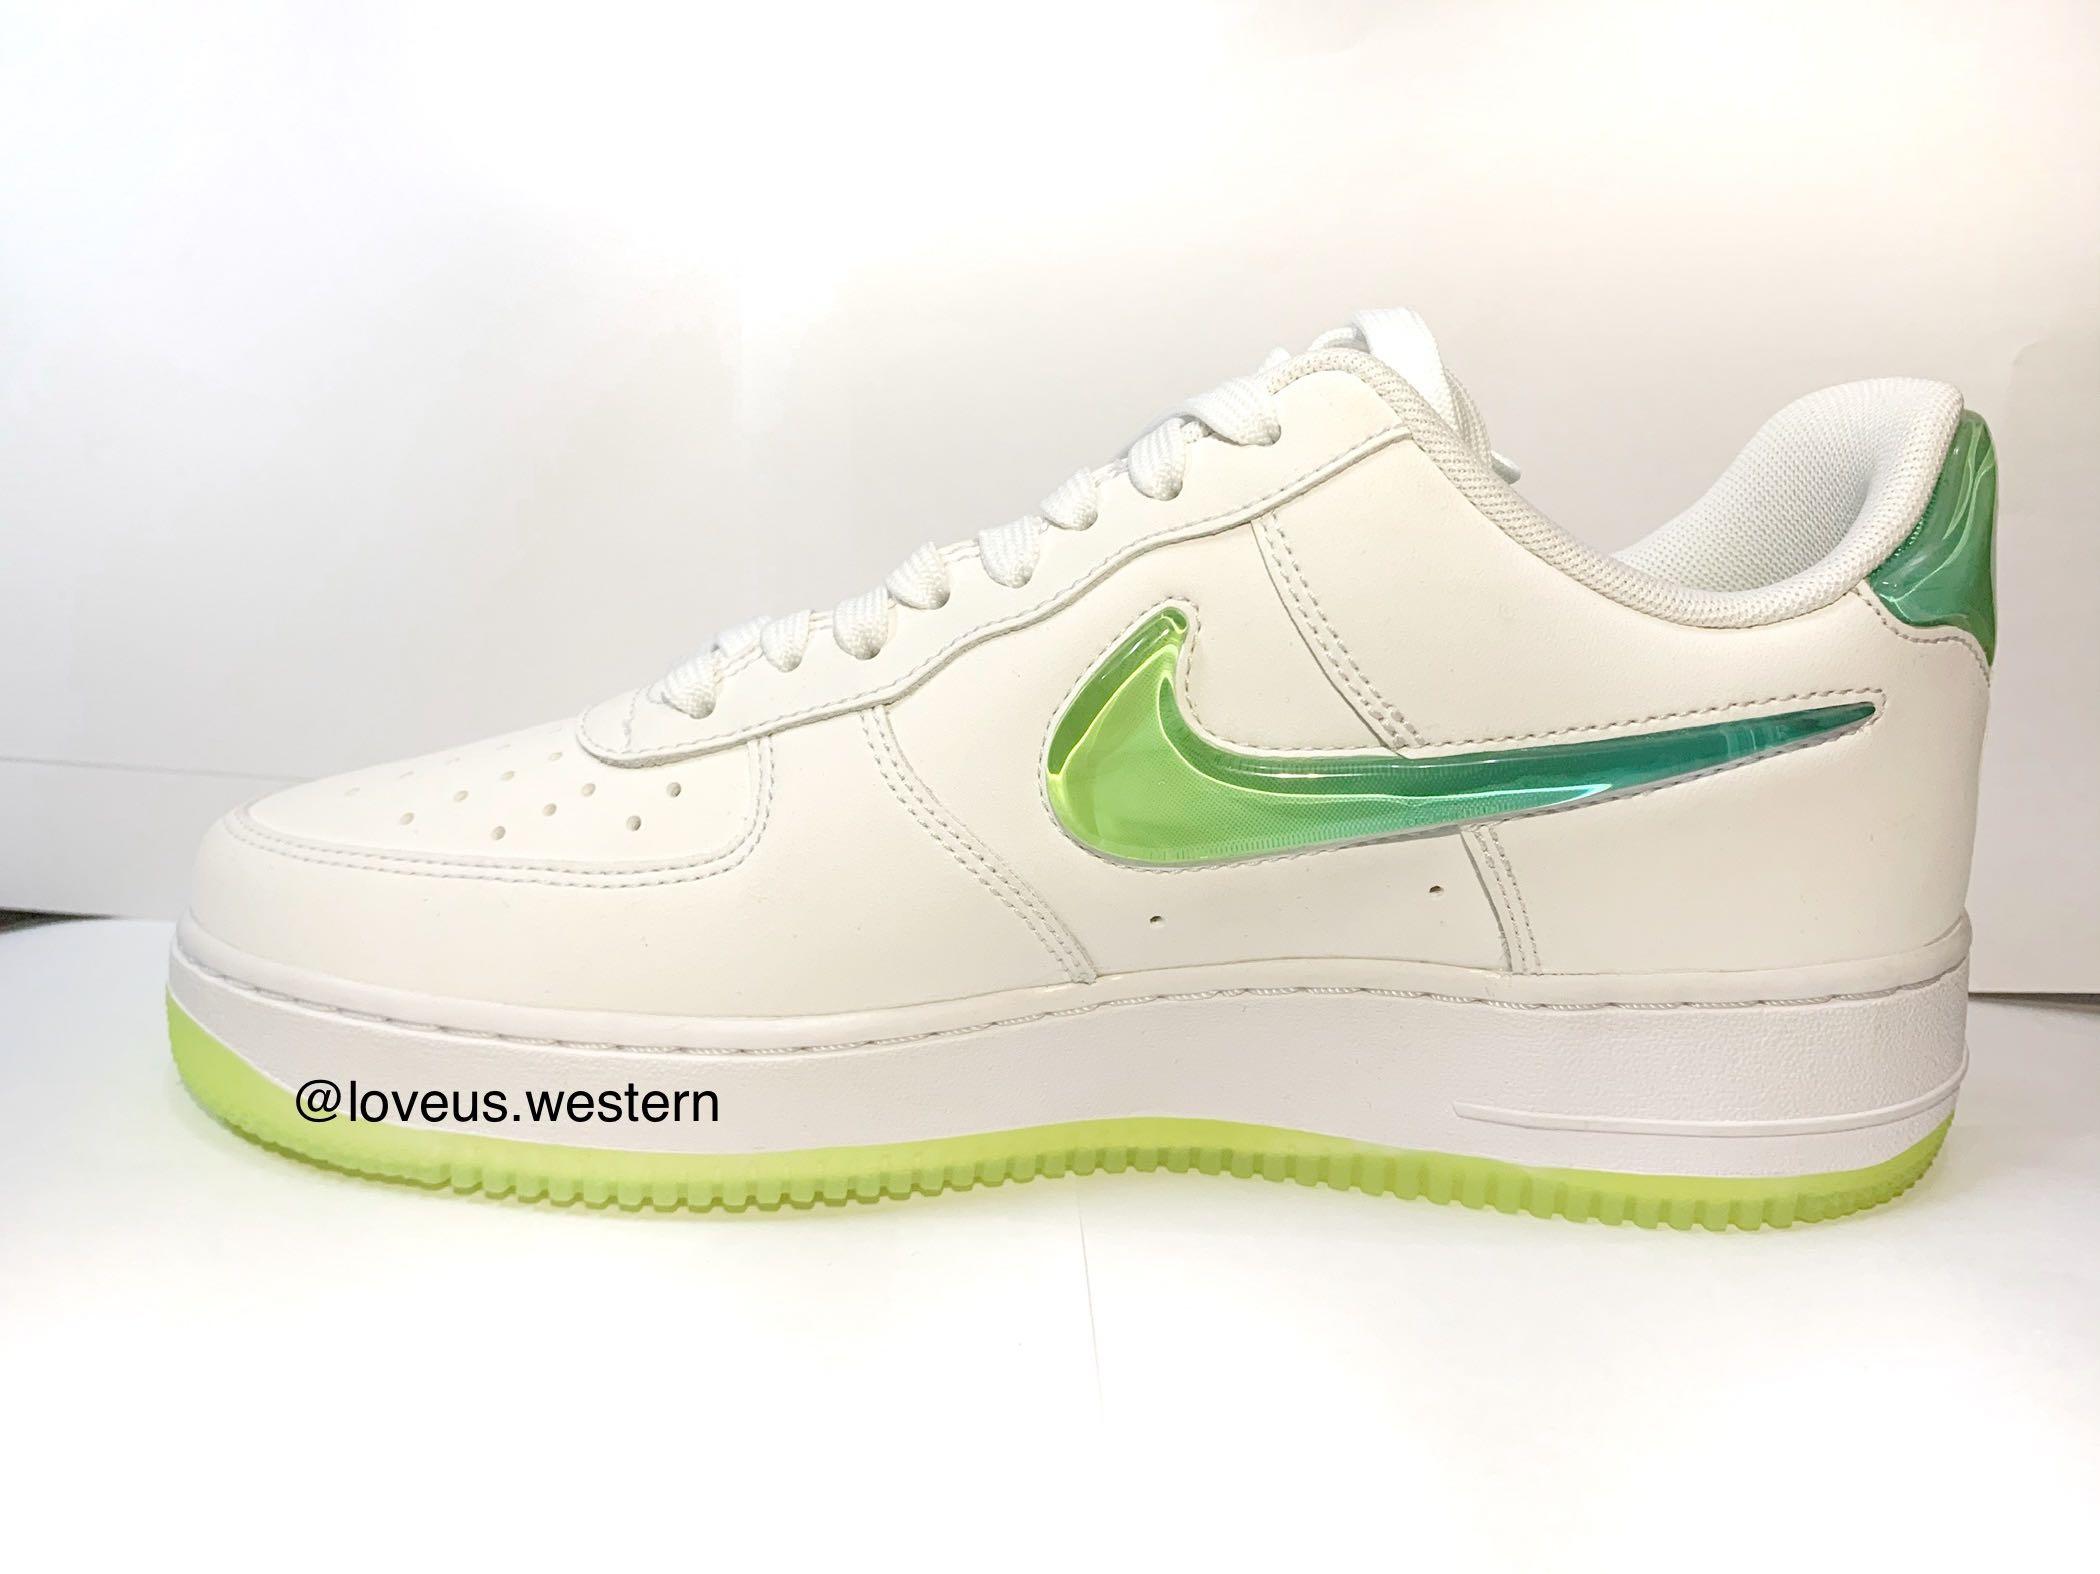 air force 1 jelly swoosh green